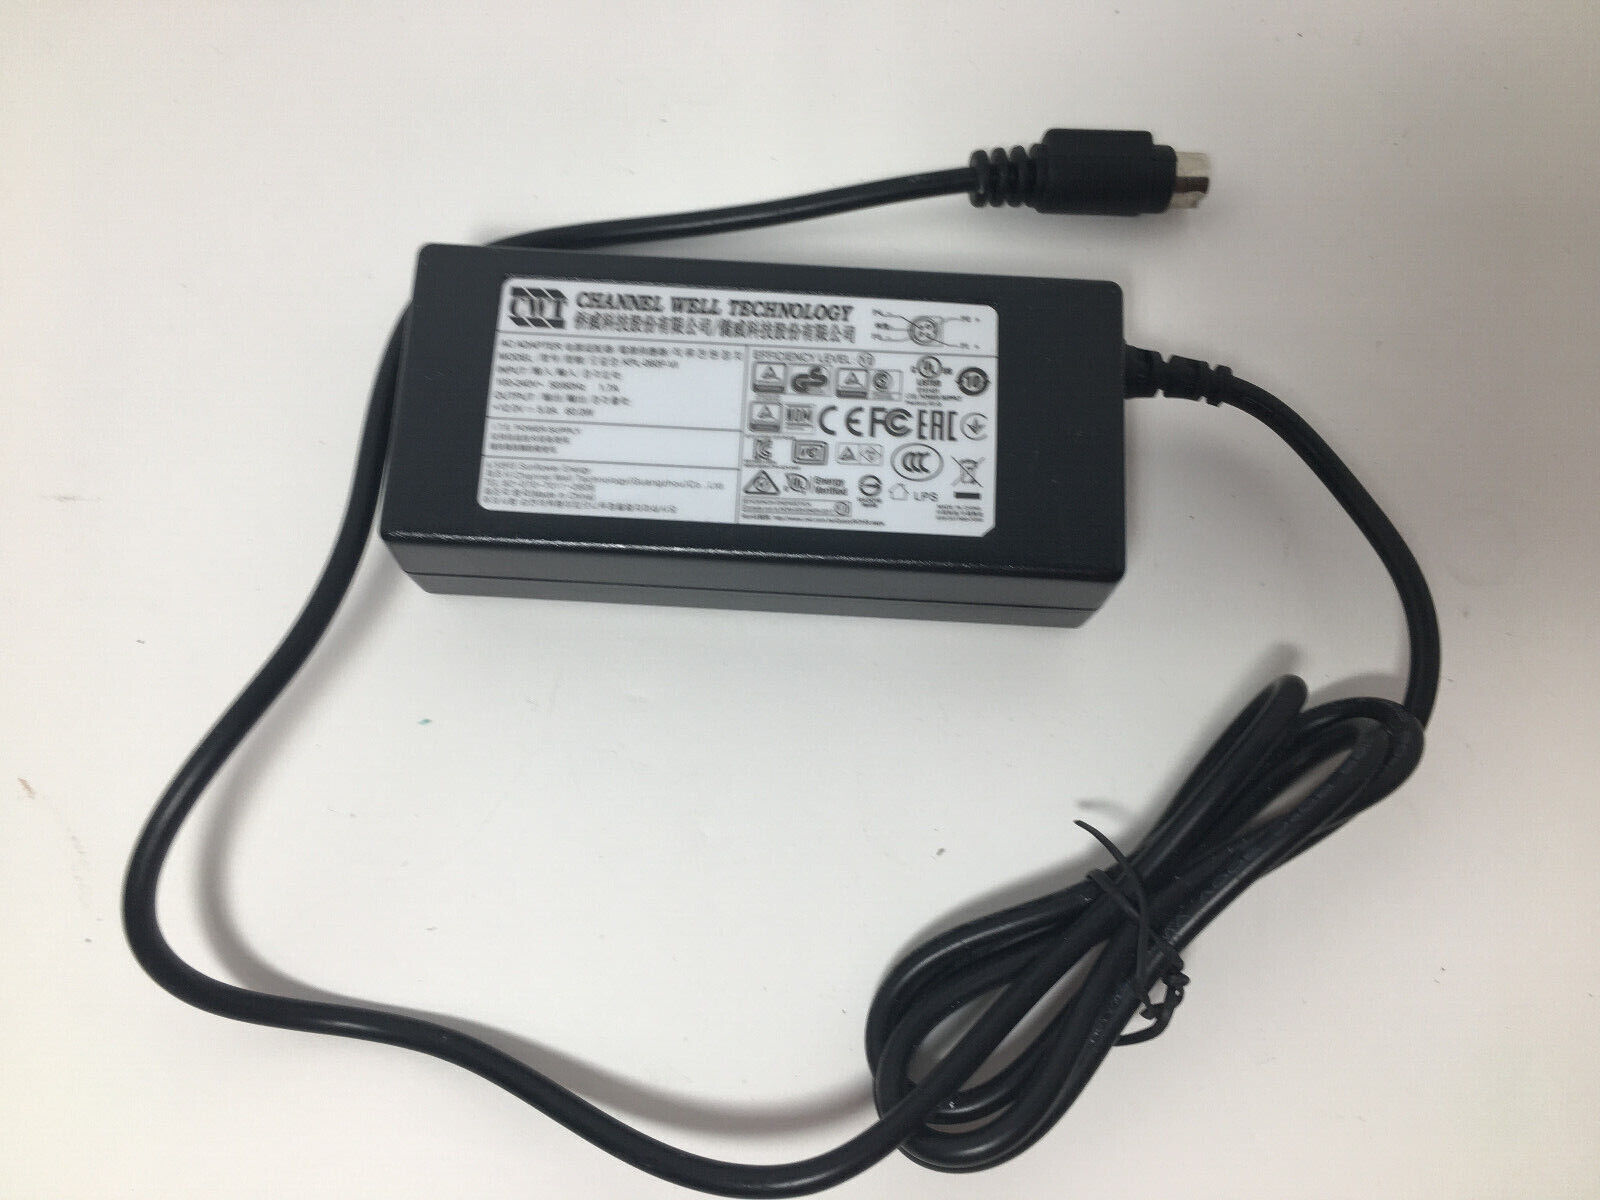 *Brand NEW*Genuine KPL-060F-VI 12V 5A 60W 4-Pin CWT Channel Well Technology AC Adapter